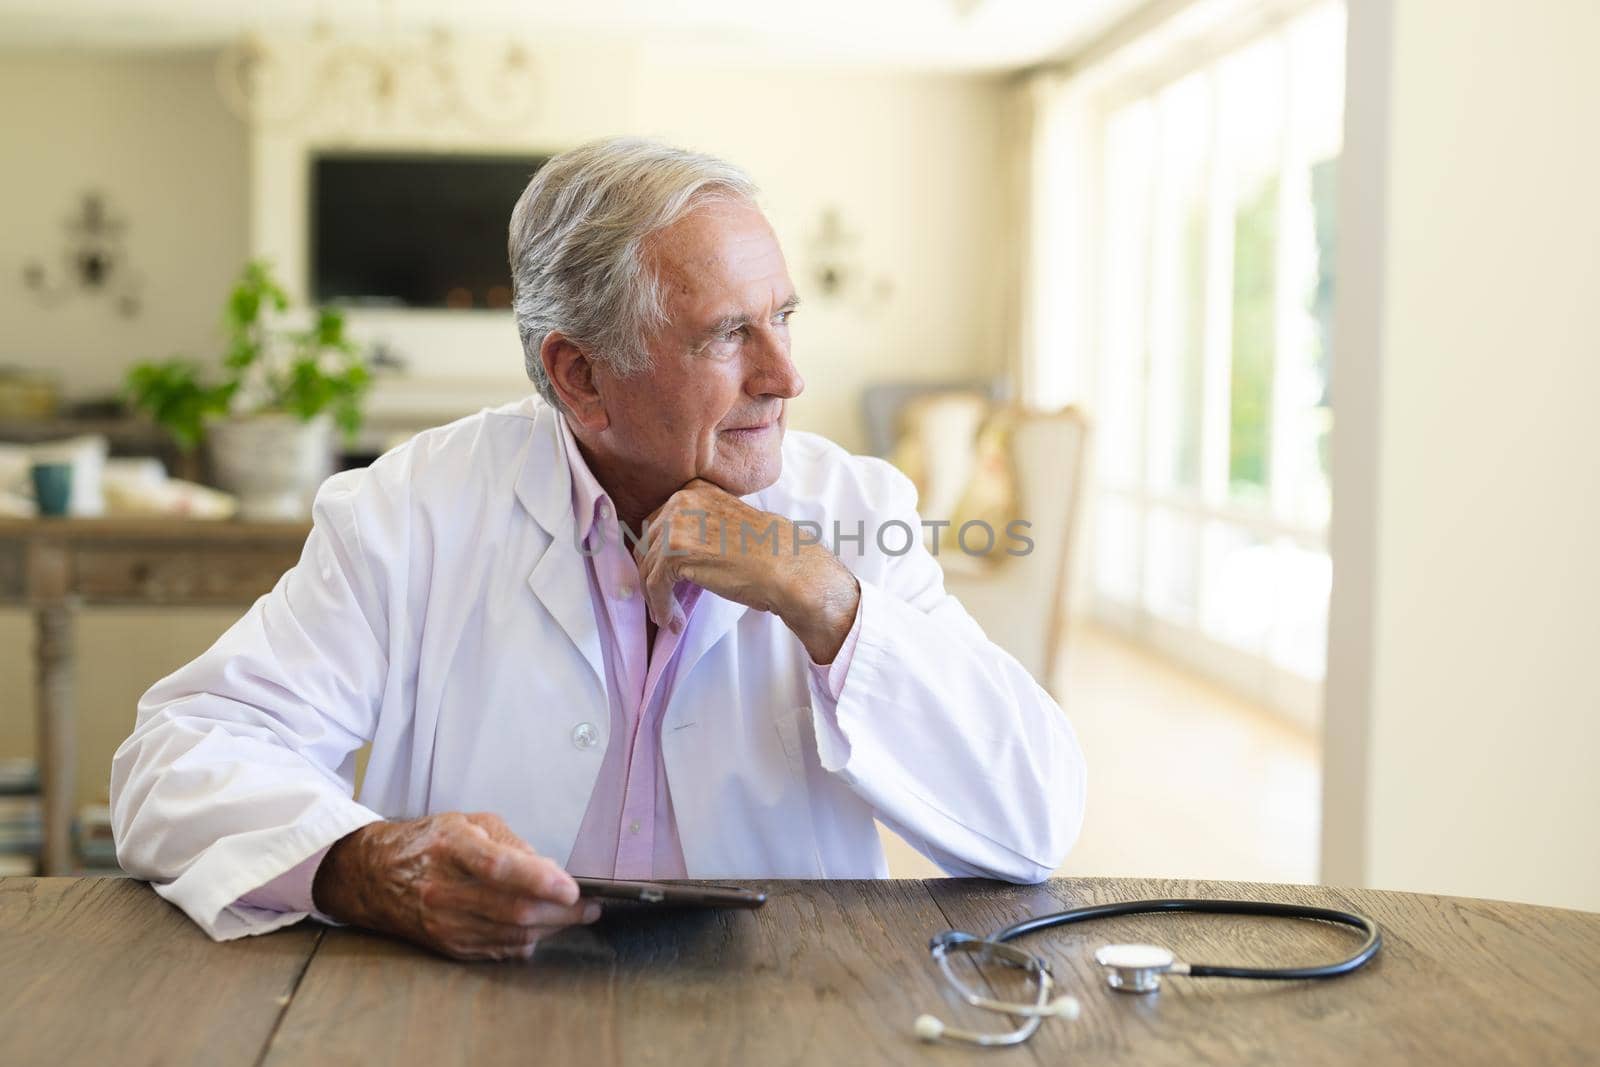 Senior caucasian male doctor sitting at table using tablet computer. medicine and healthcare services concept.